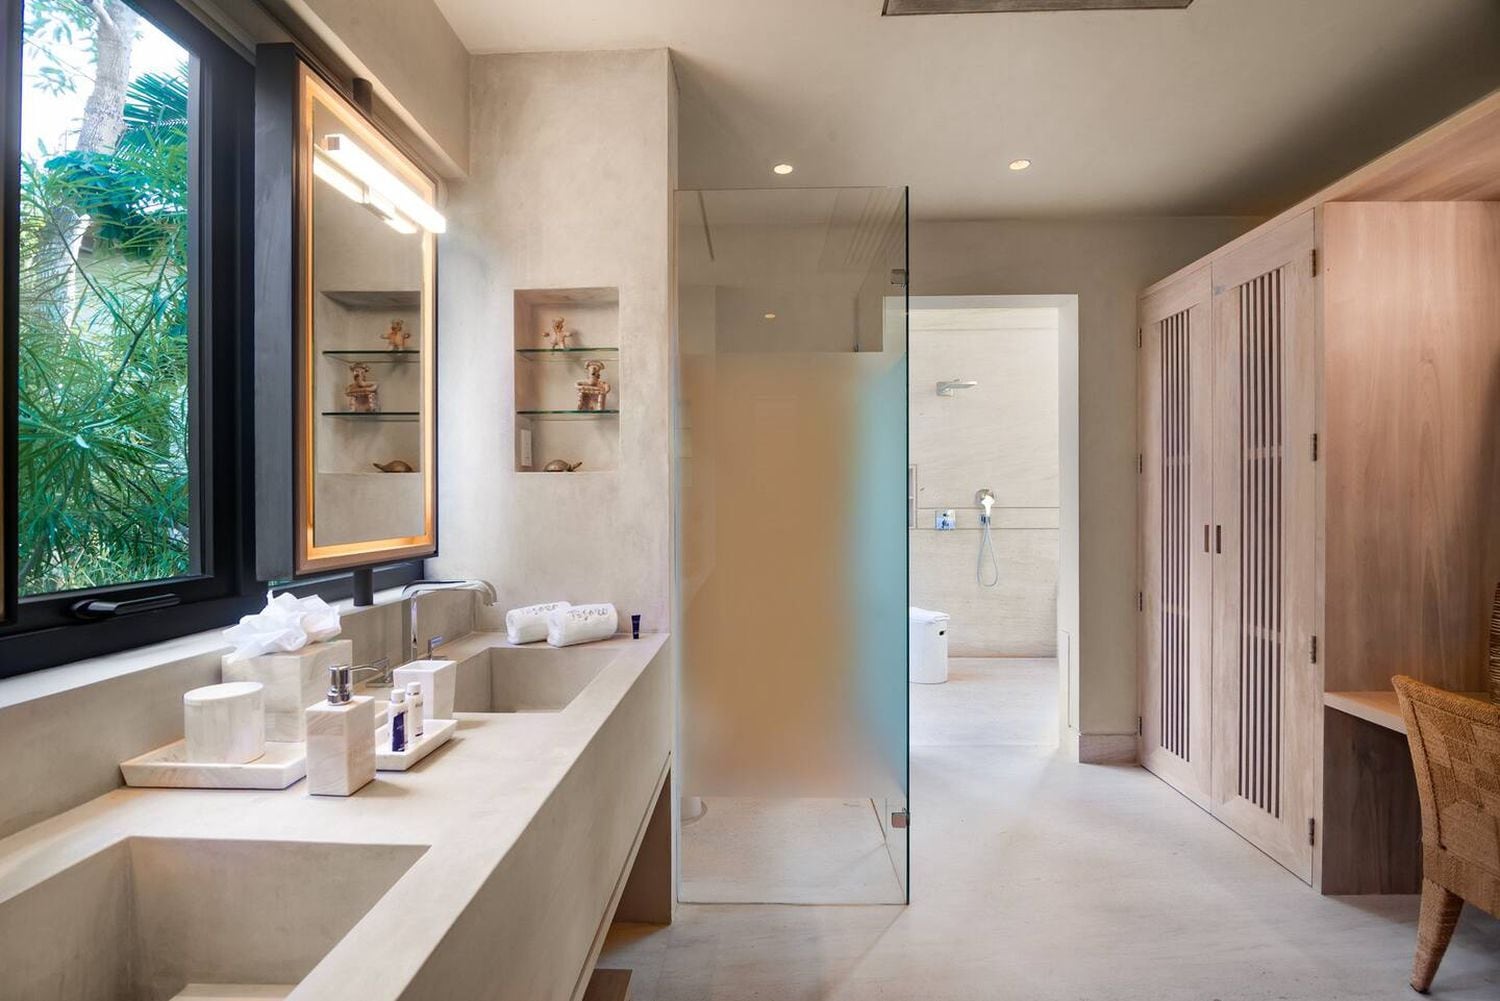 Indoor bathroom (yes, there are outdoor bathrooms as well!) at Villa Tesoro.